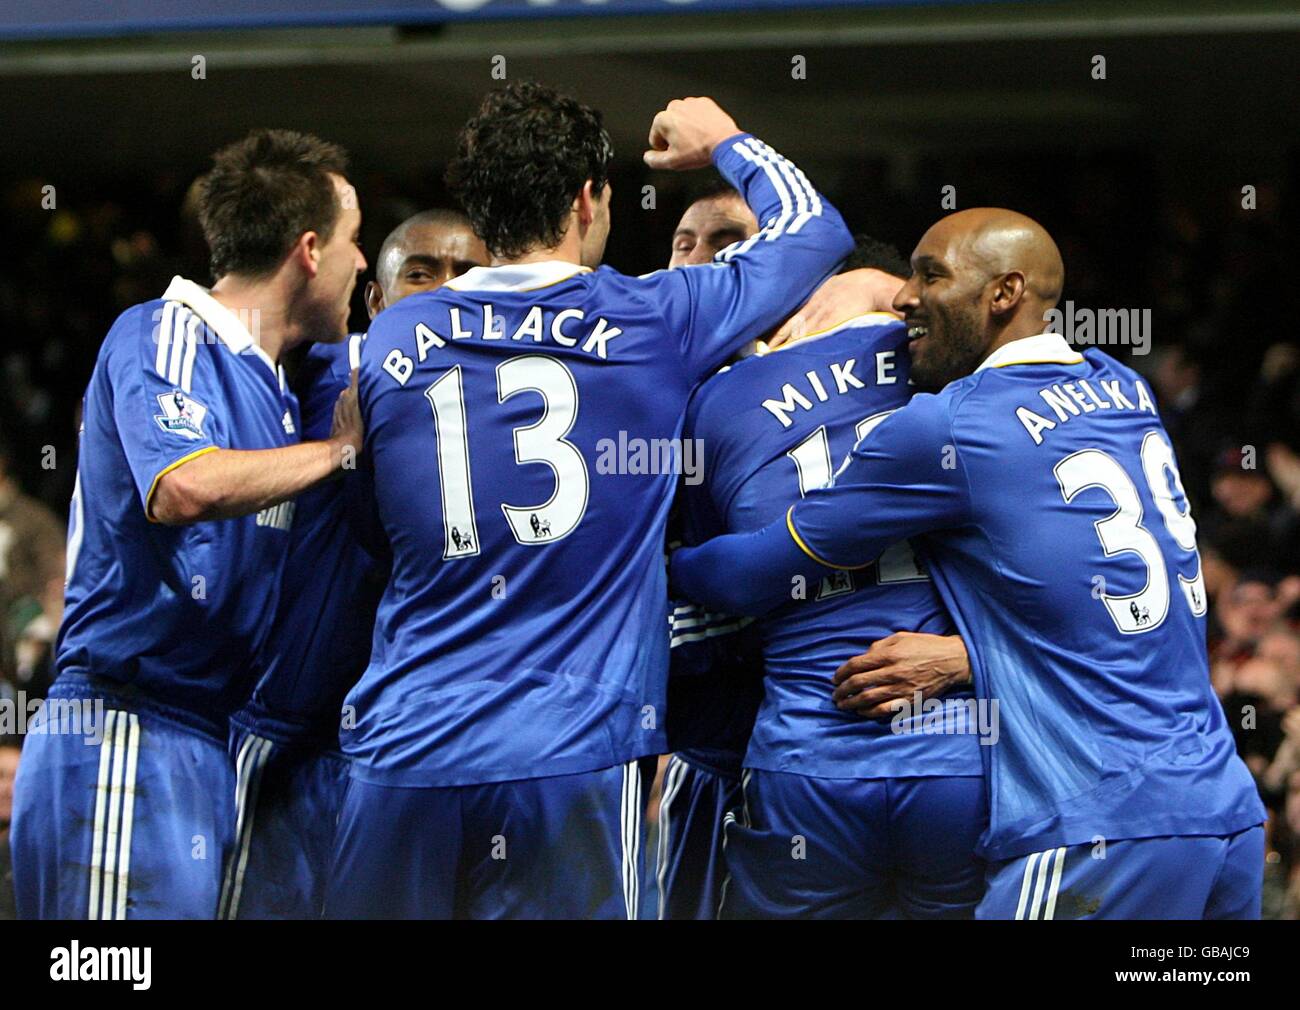 Soccer - Barclays Premier League - Chelsea v Arsenal - Stamford Bridge. Chelsea's players celebrate the opening goal of the game, an own goal scored by Arsenal's Johan Djourou Stock Photo